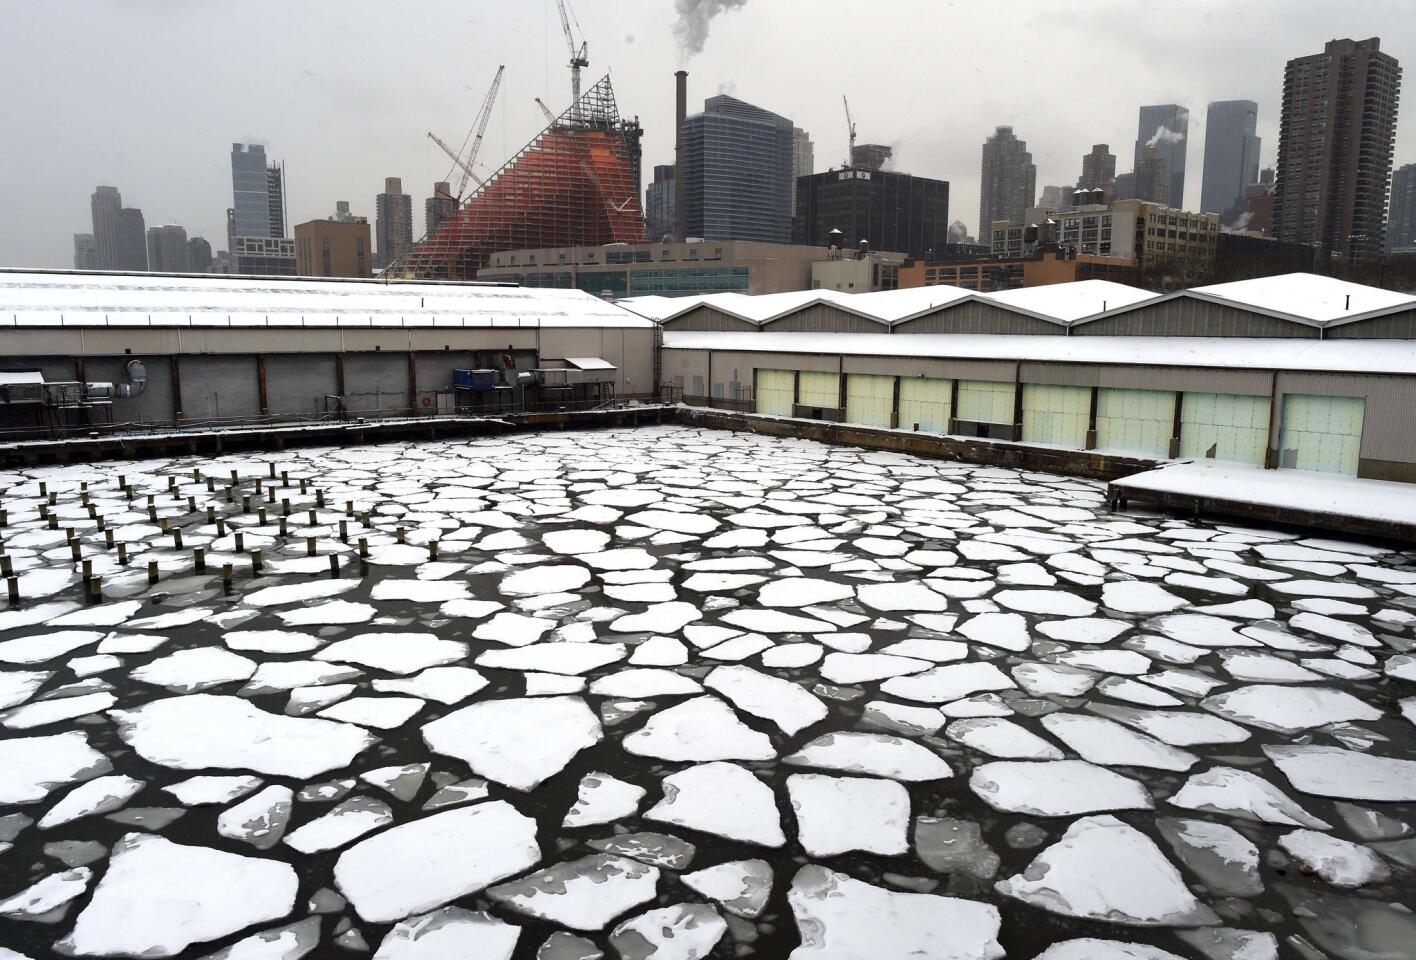 Snow-covered ice floats on the Hudson River outside of Pier 92 and Pier 94 in New York on Feb. 17.